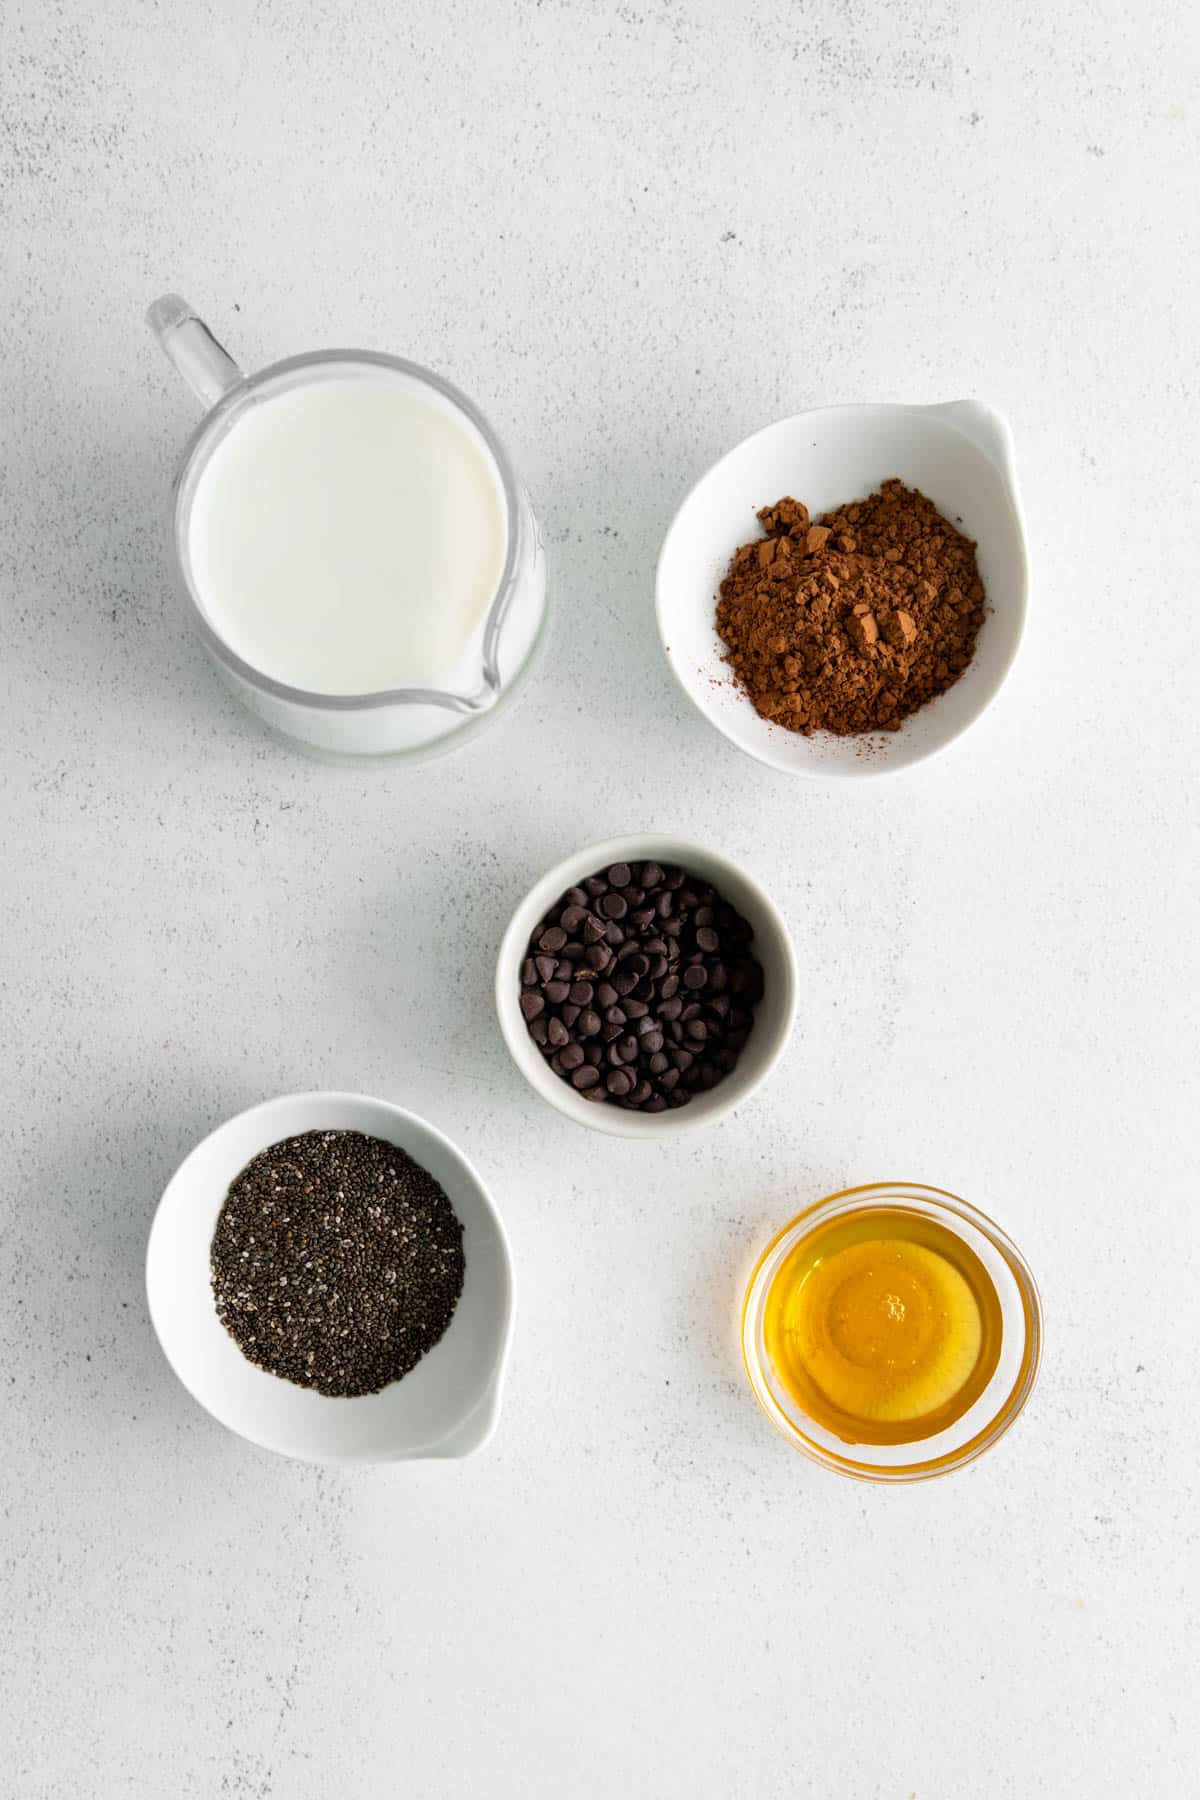 Chocolate chia pudding ingredients in separate bowls.